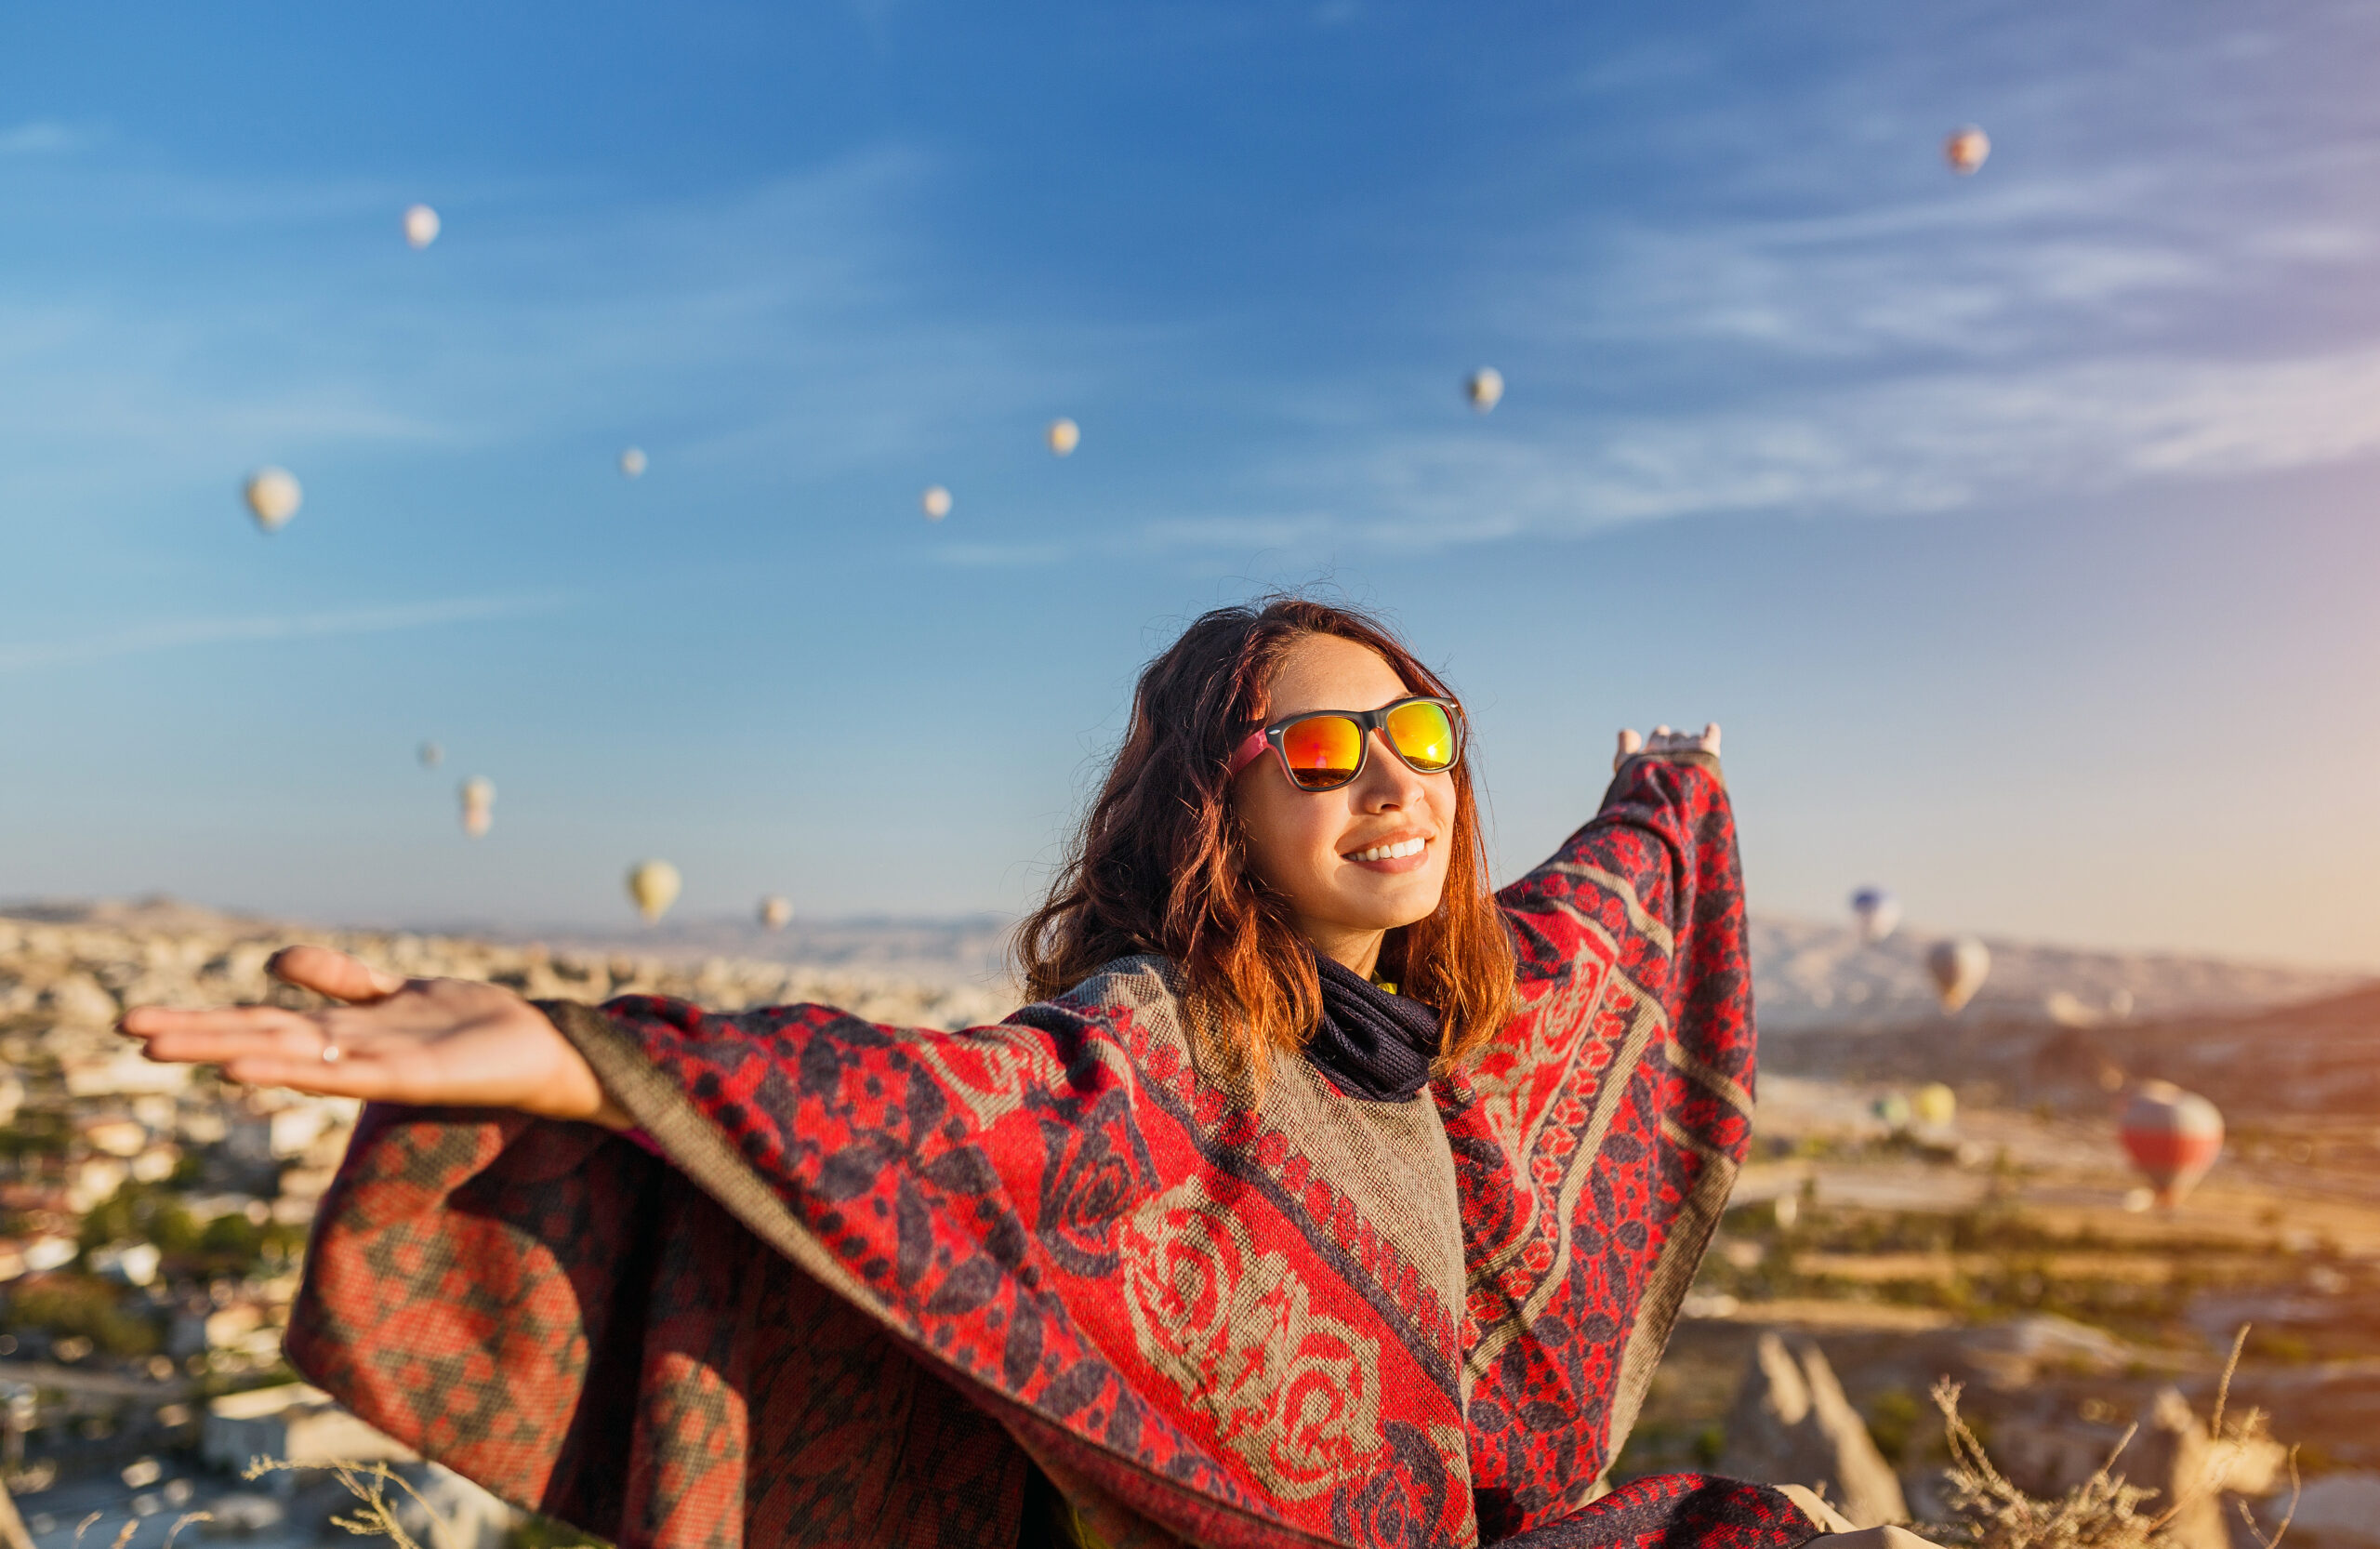 Witness the magic of a tourist girl embracing the captivating sunrise and the spectacle of colorful hot air balloons over Cappadocia's landscape. Experience the essence of joyful travel in Turkey.